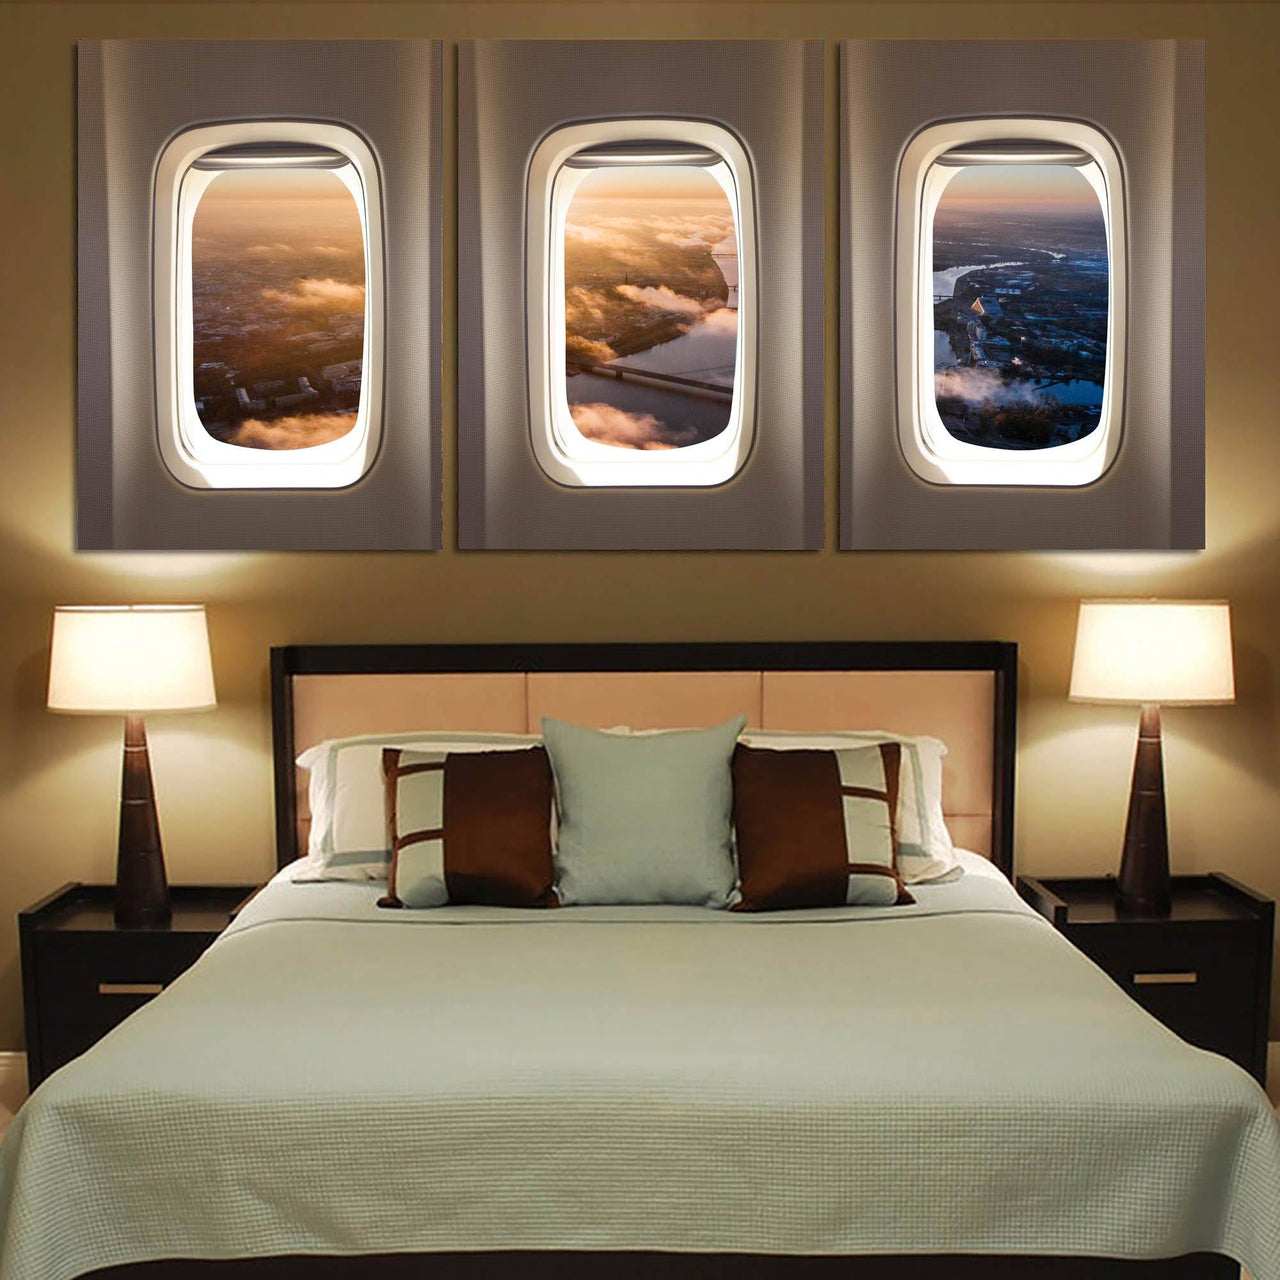 Super View from Above through Passanger Windows Printed Canvas Posters (3 Pieces) Aviation Shop 